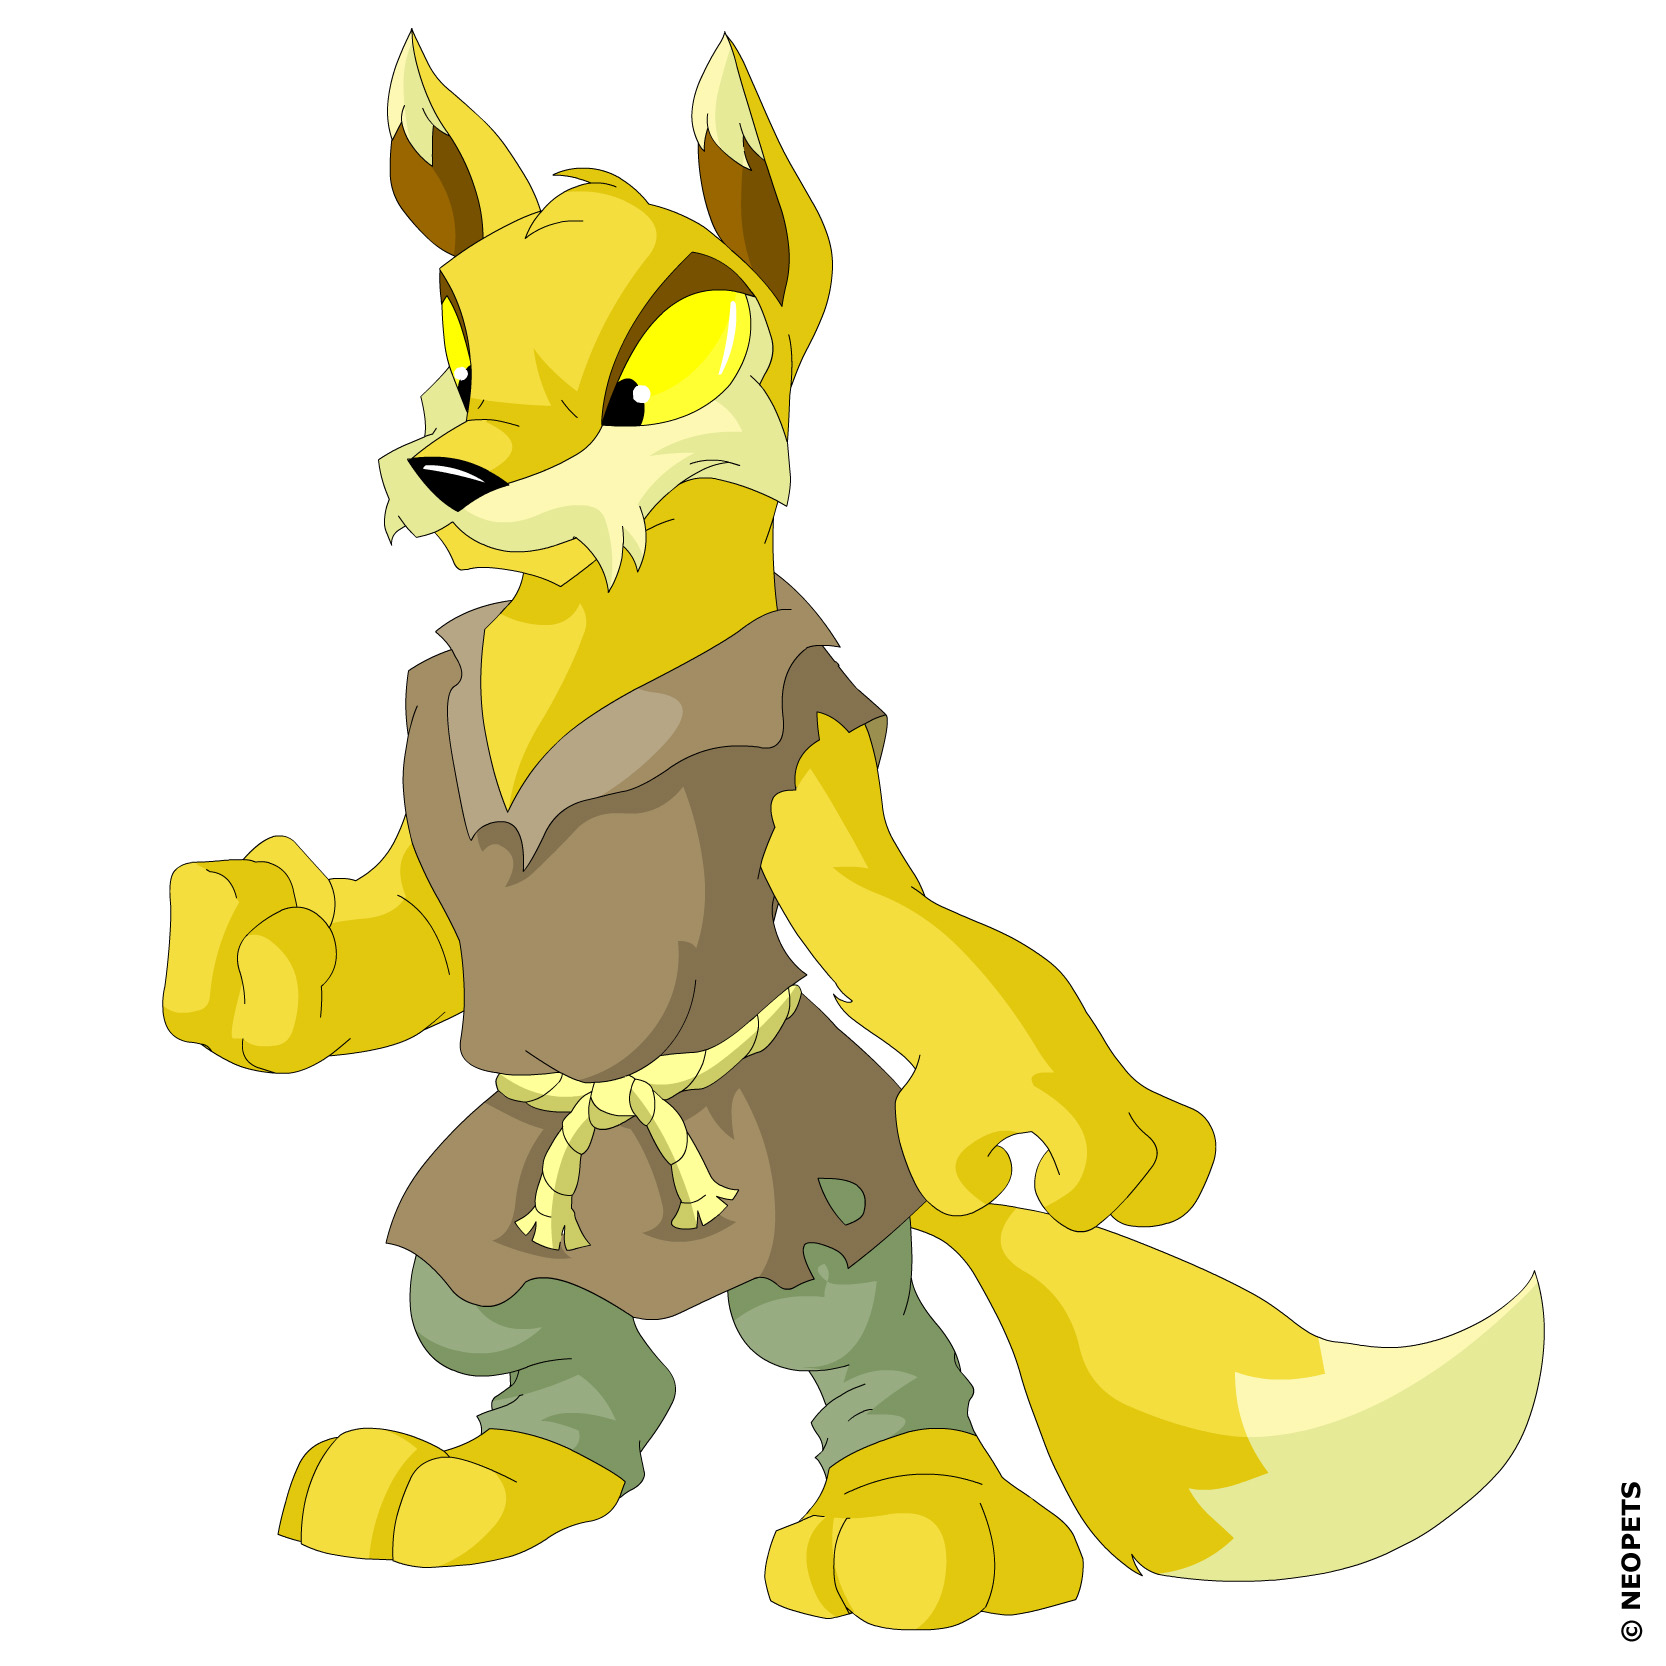 https://images.neopets.com/press/lupe_2.jpg